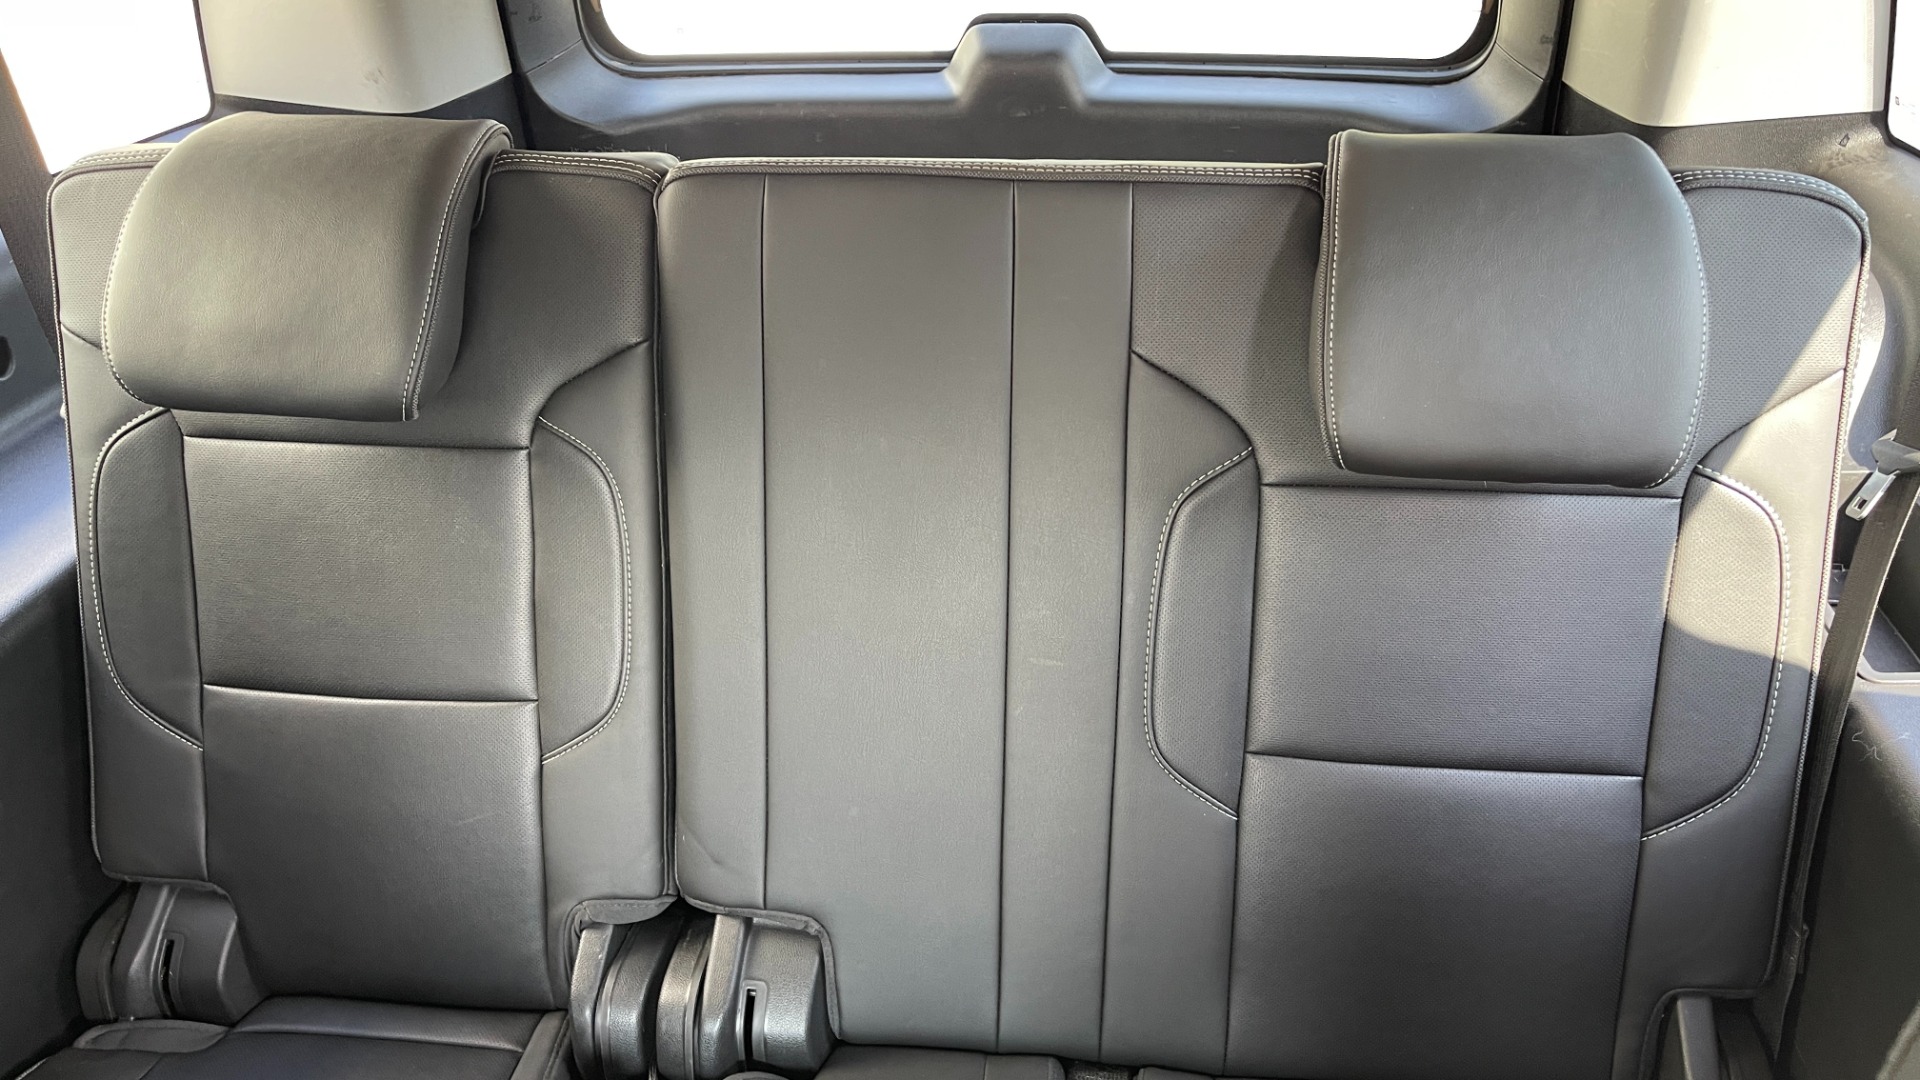 Used 2019 GMC Yukon XL DENALI / LEATHER / 4WD / CAPTAINS CHAIRS / 3 ROW SEATING for sale $55,000 at Formula Imports in Charlotte NC 28227 23